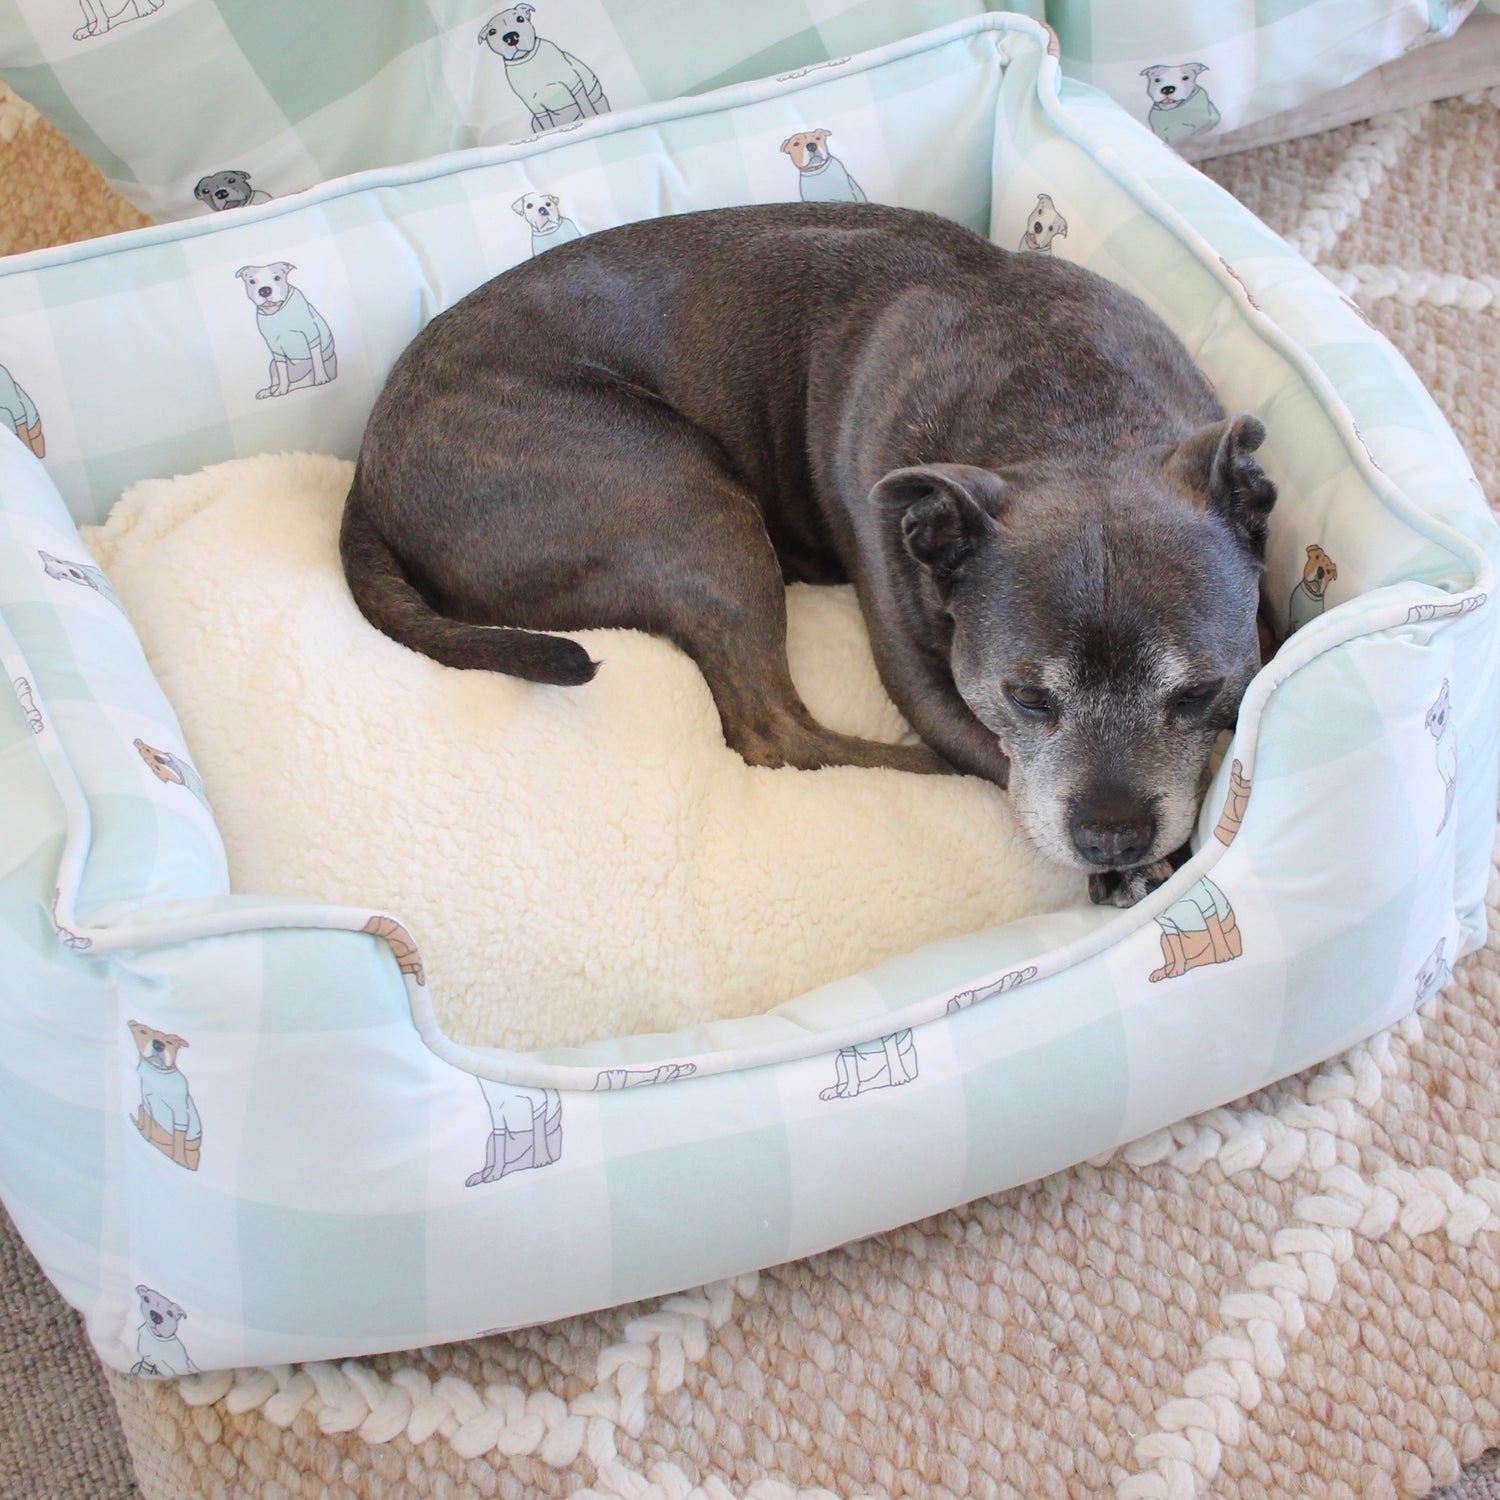 The Darren and Phillip removable cover dog bed.